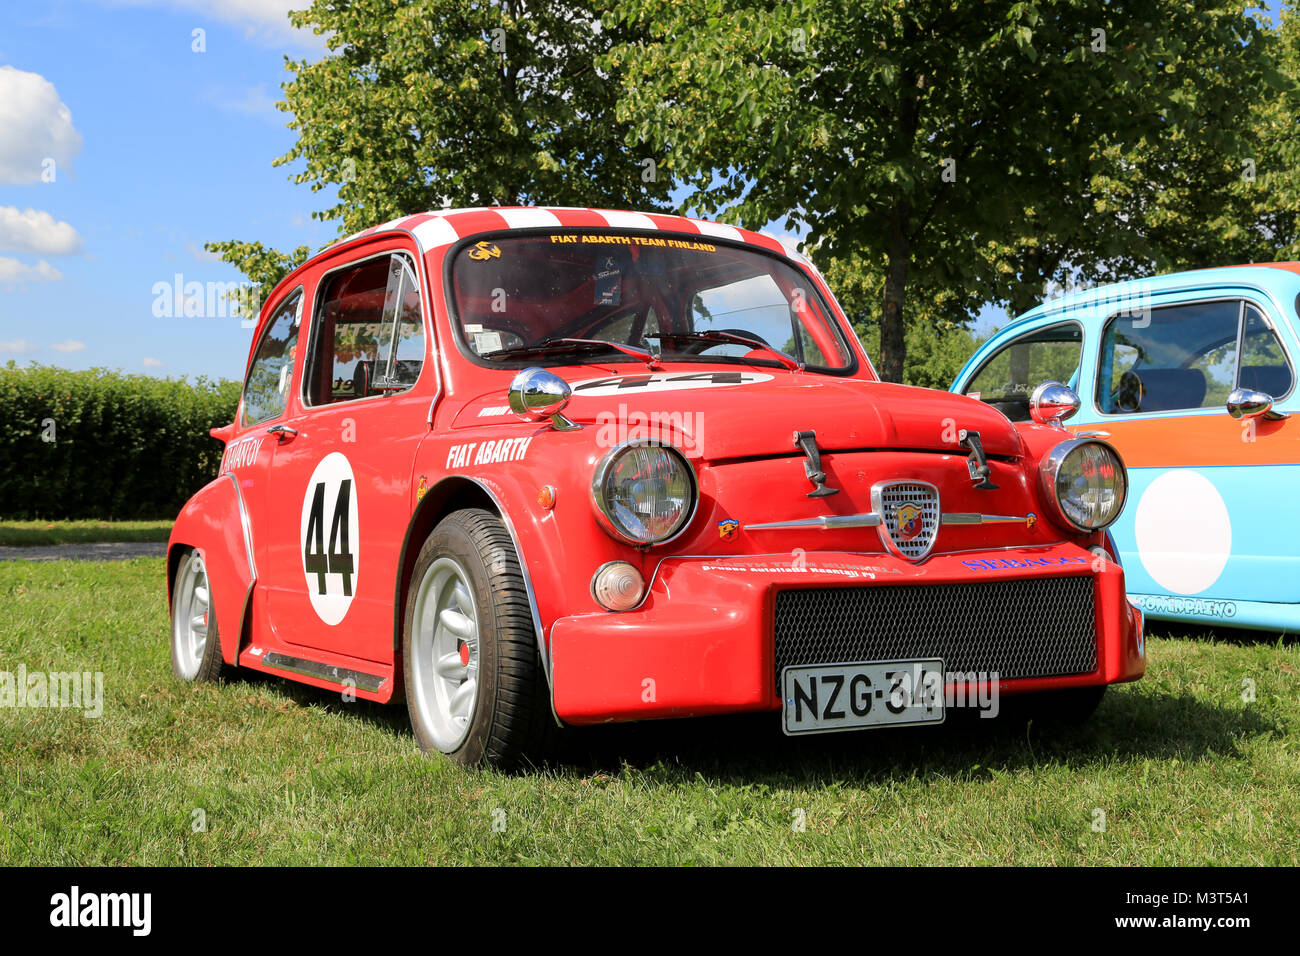 PIIKKIO, FINLAND - JULY 19, 2014: Red Fiat Abarth racing car parked on grass. Abarth began his well-known association with Fiat in 1952. Stock Photo